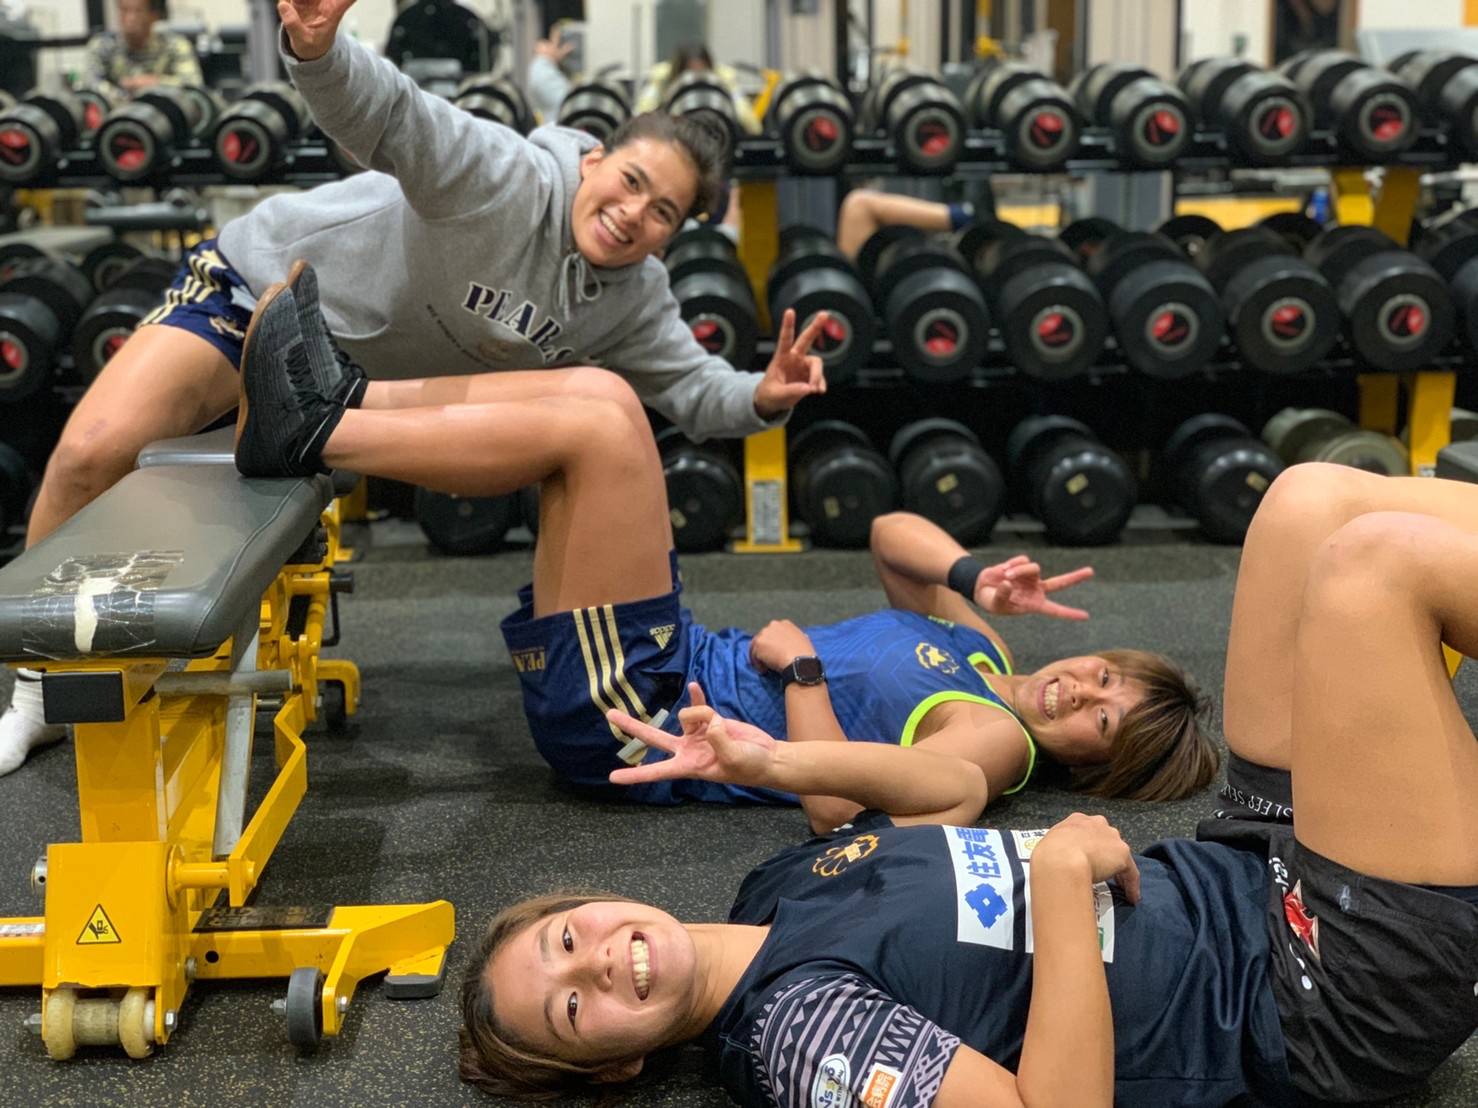 Reina Iizuka (in the back) sees growth taking place in women's rugby and cites the Olympics as being one of its main drivers.  | COURTESY OF REINA IIZUKA